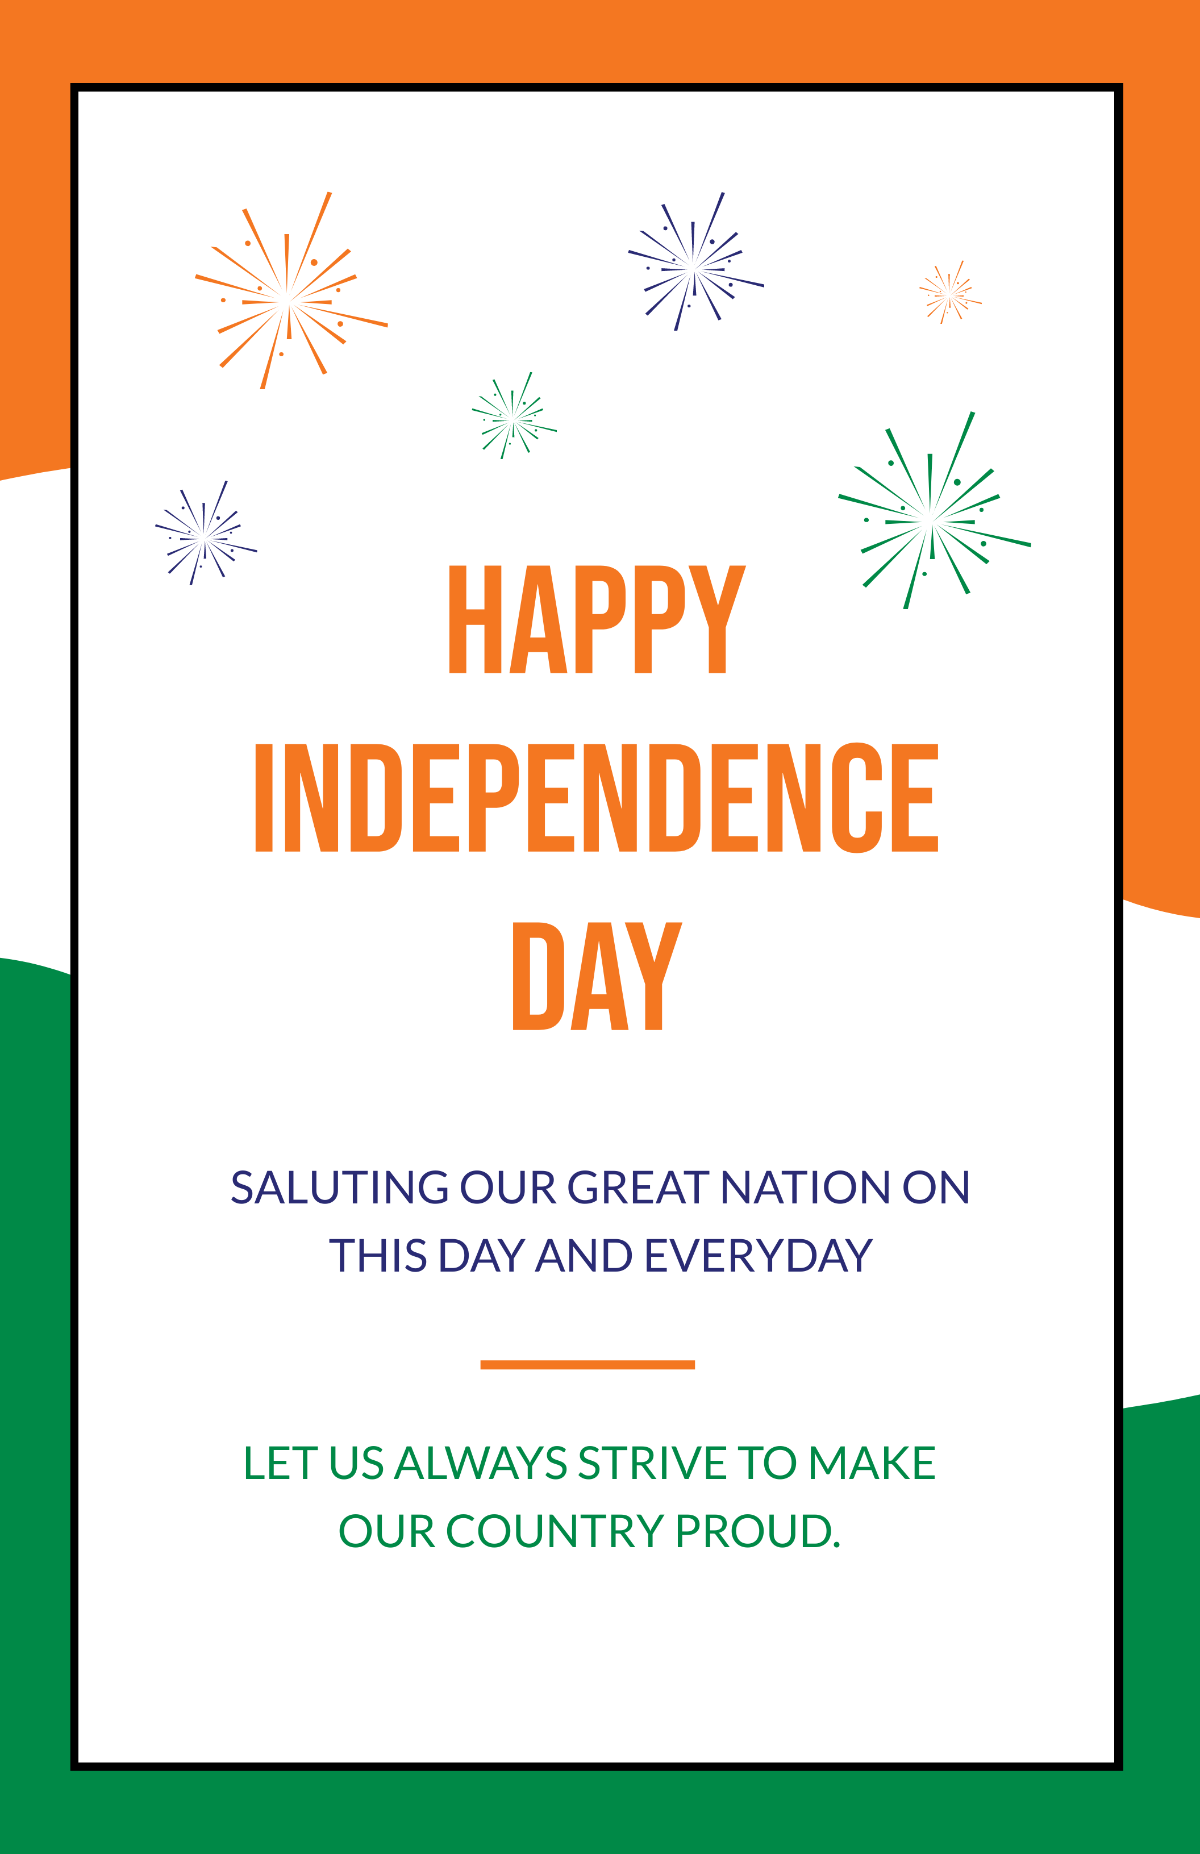 India Independence Day Greeting Card Template